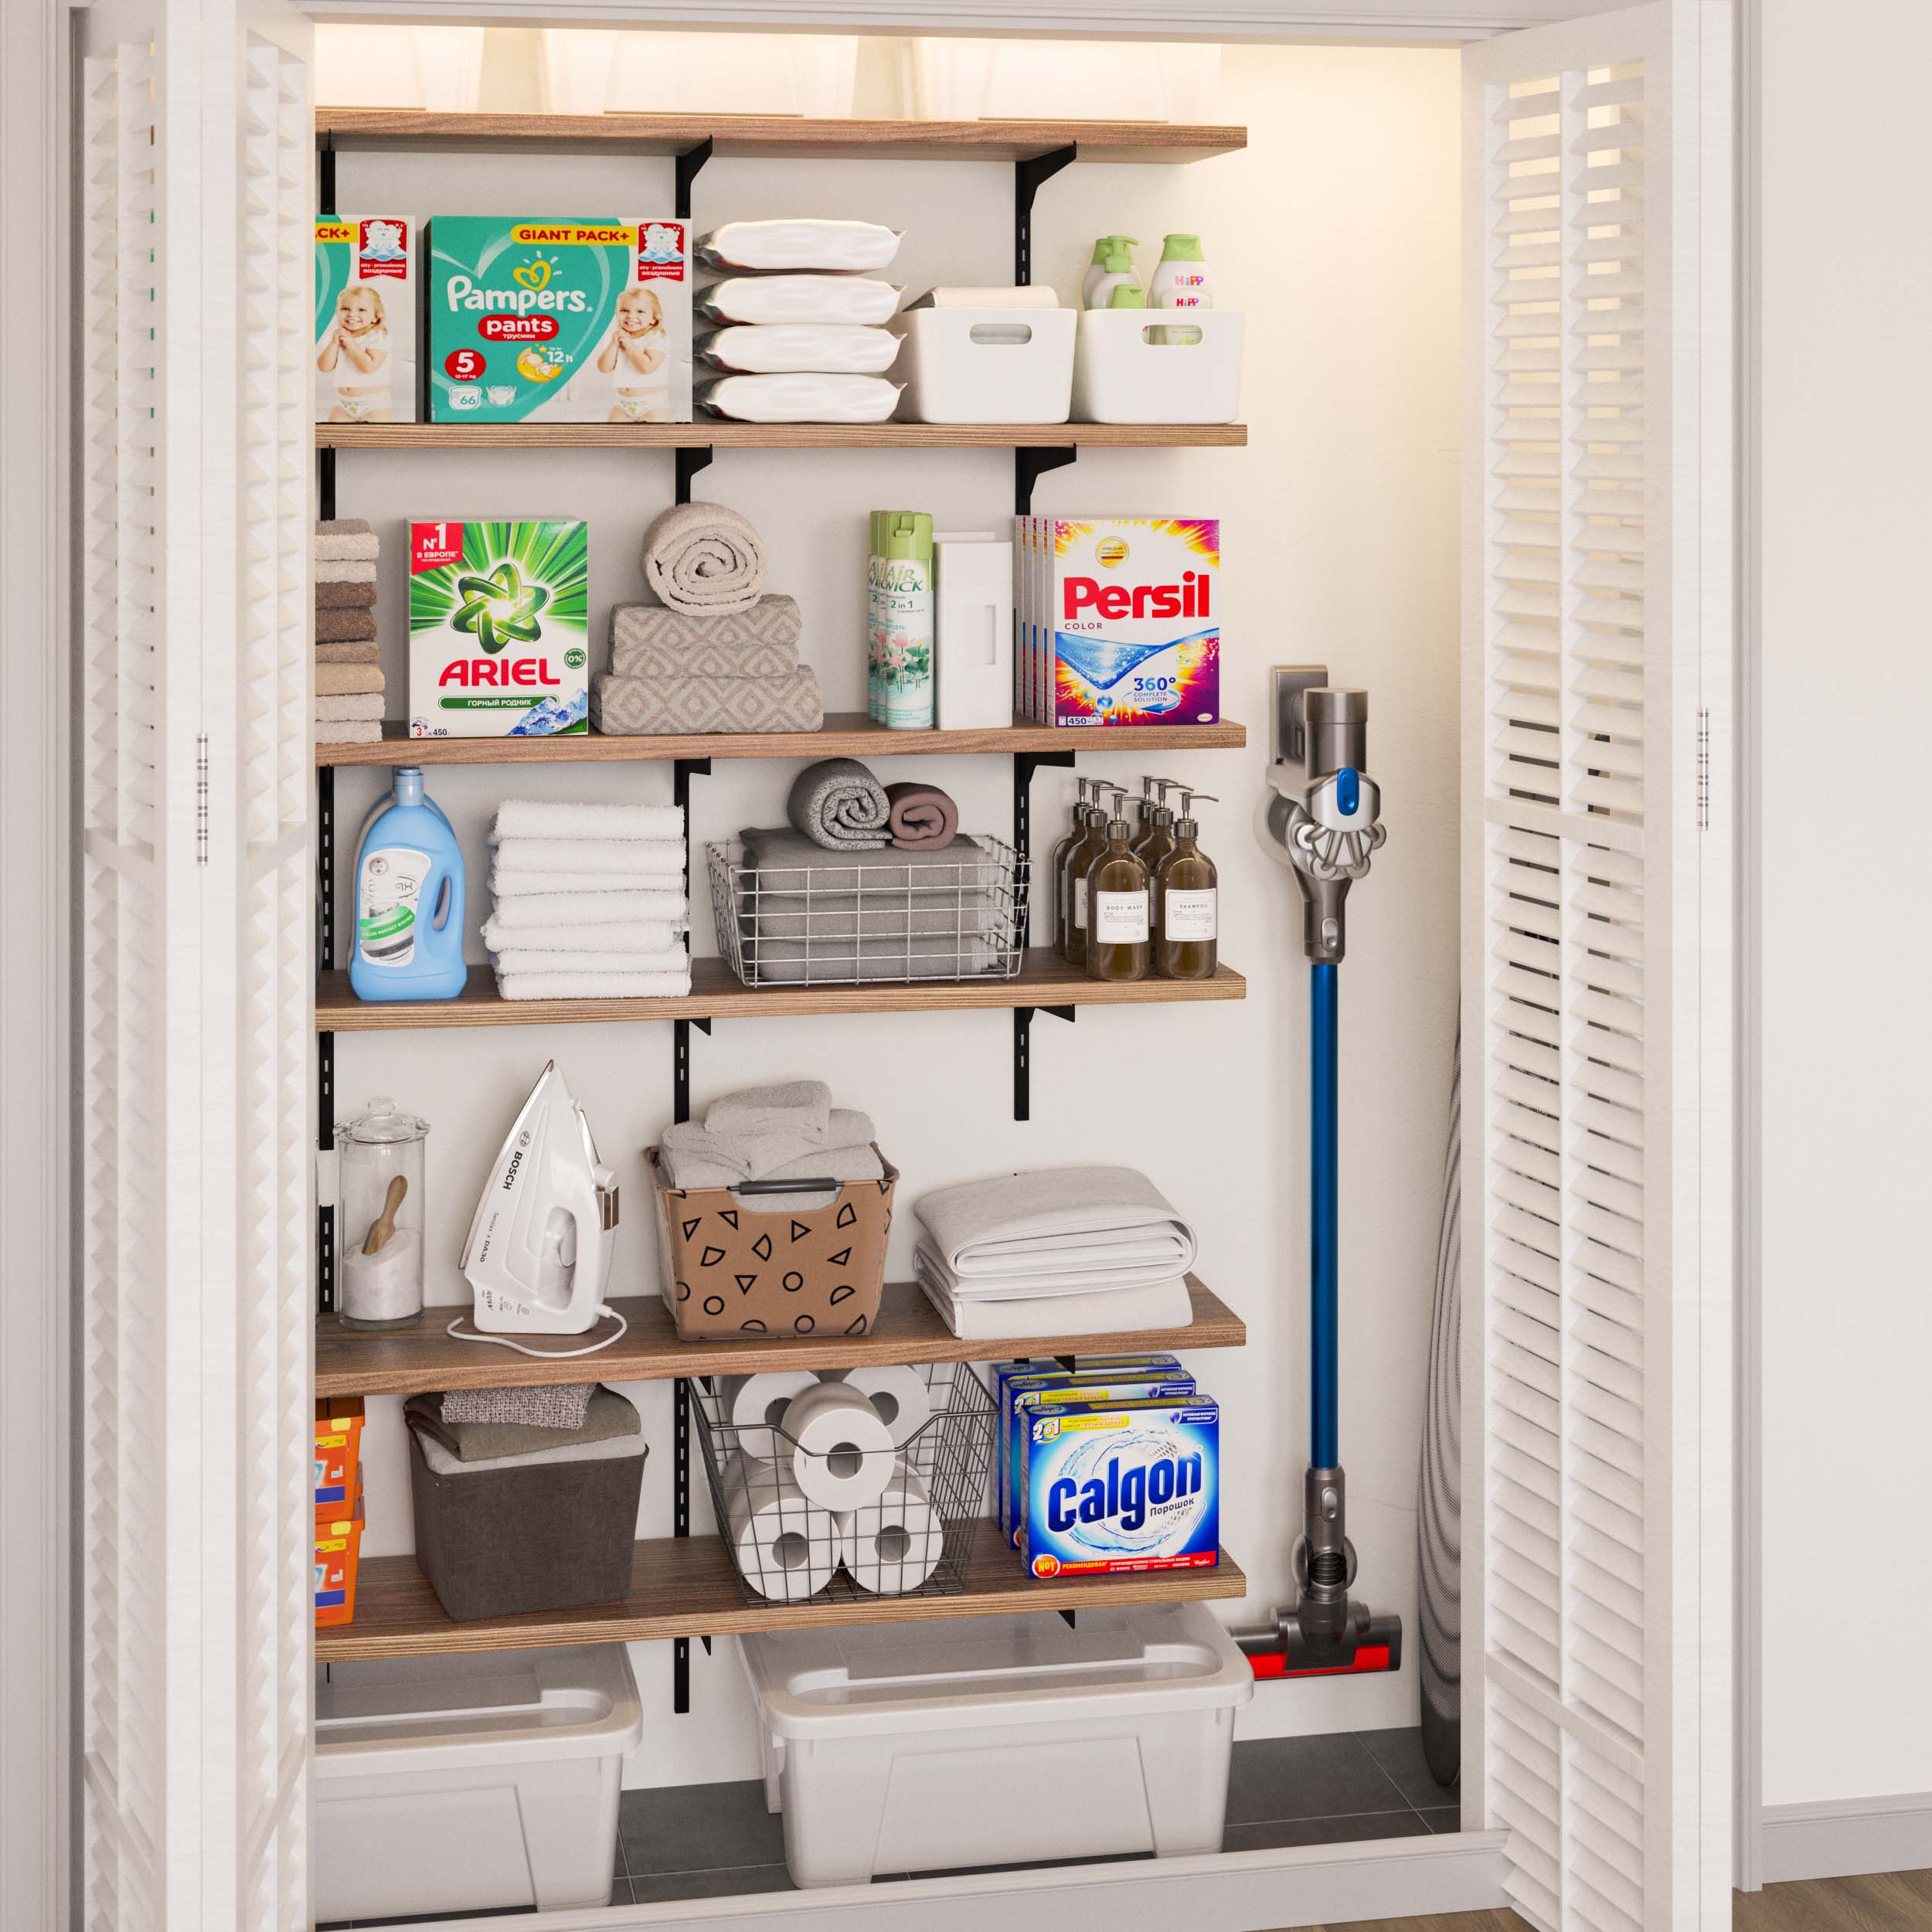 A utility closet with closet organizer shelves full of household items like detergents, towels, and cleaning tools.